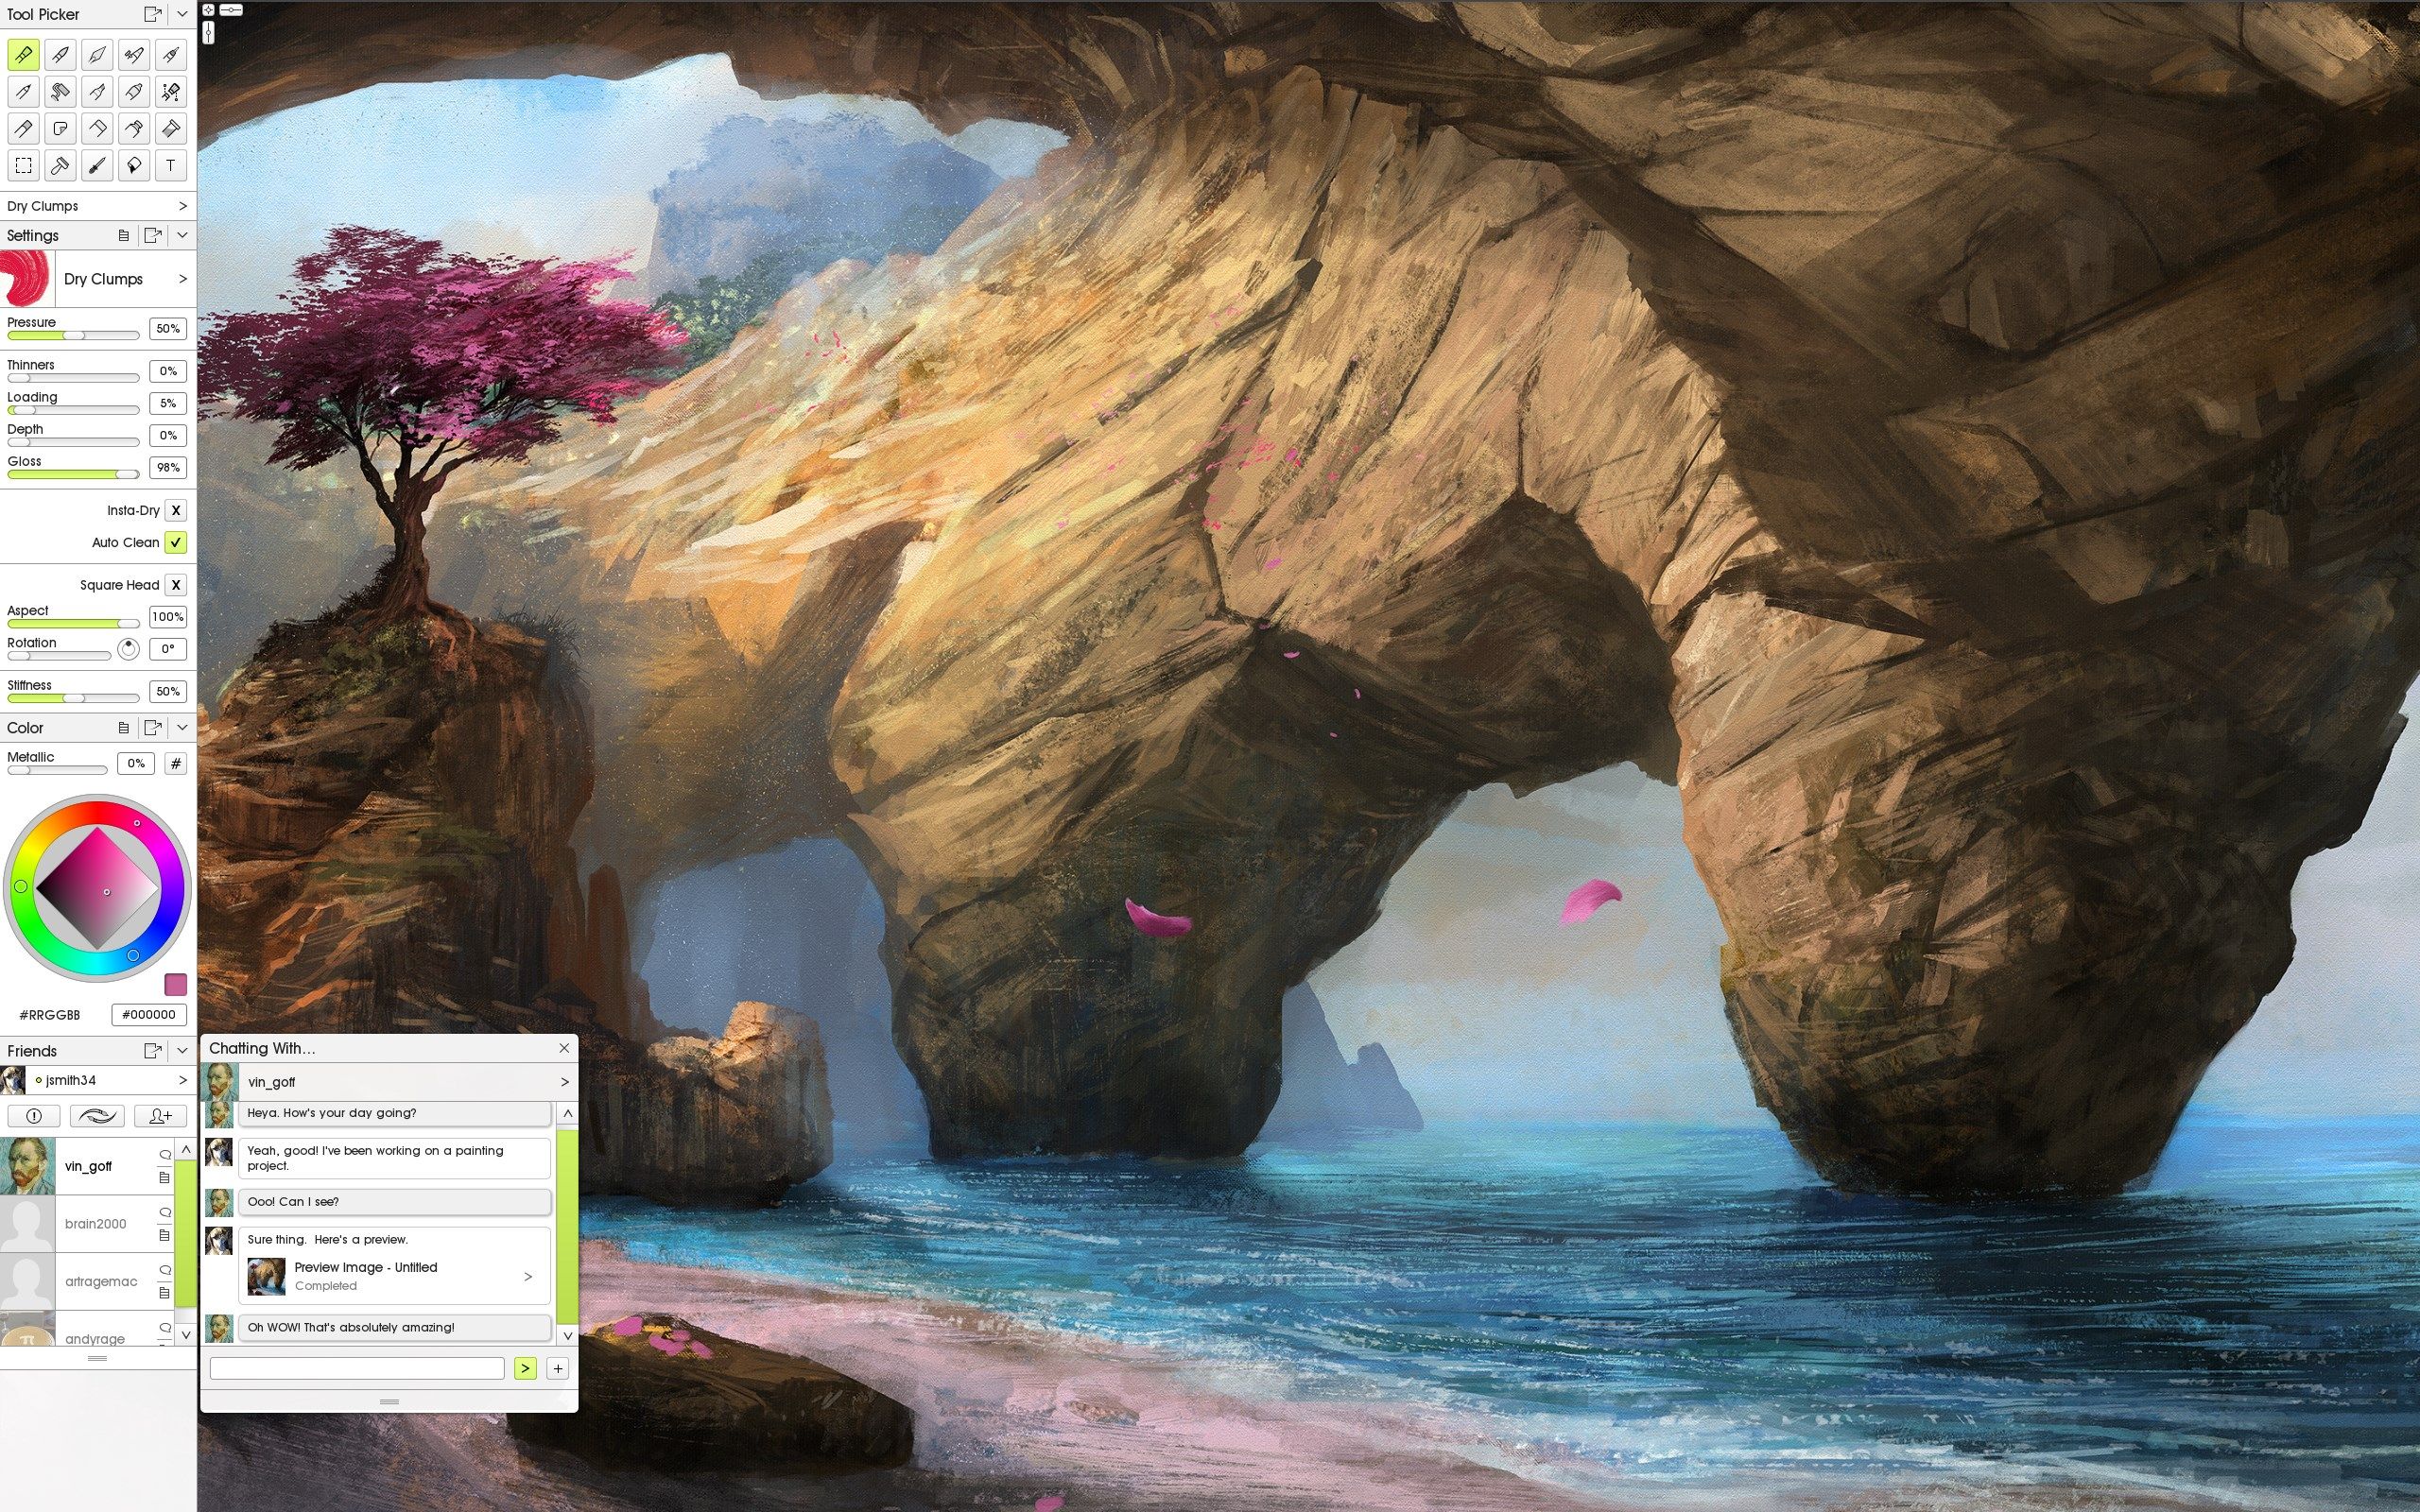 Show your ArtRage friends what you're working on with inbuilt messaging.